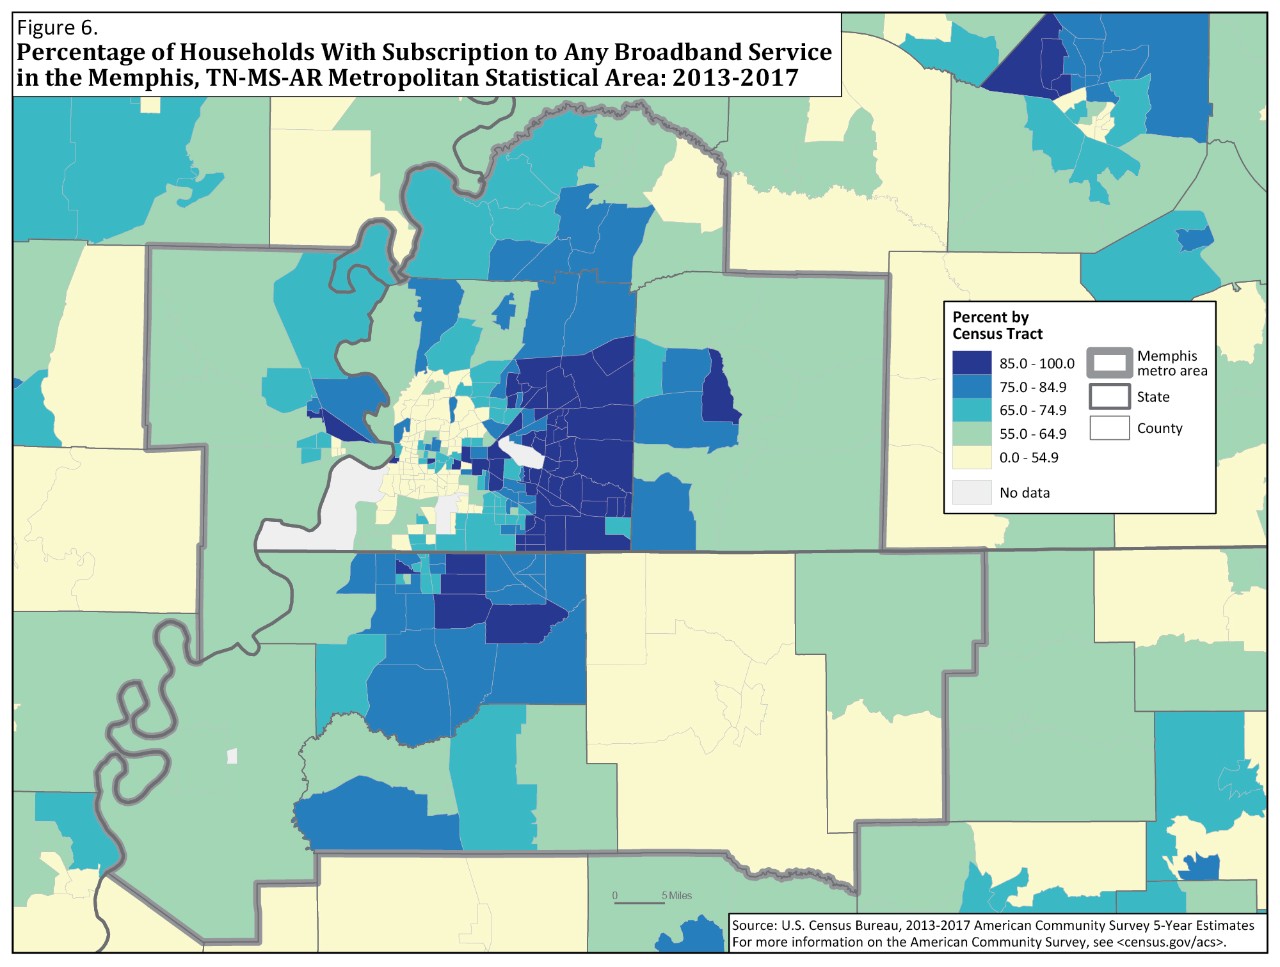 Figure 6. Percentage of Households With Subscription to Any Broadband Service in the Memphis, TN-MS-AR Metropolitan Statistical Area: 2013-2017